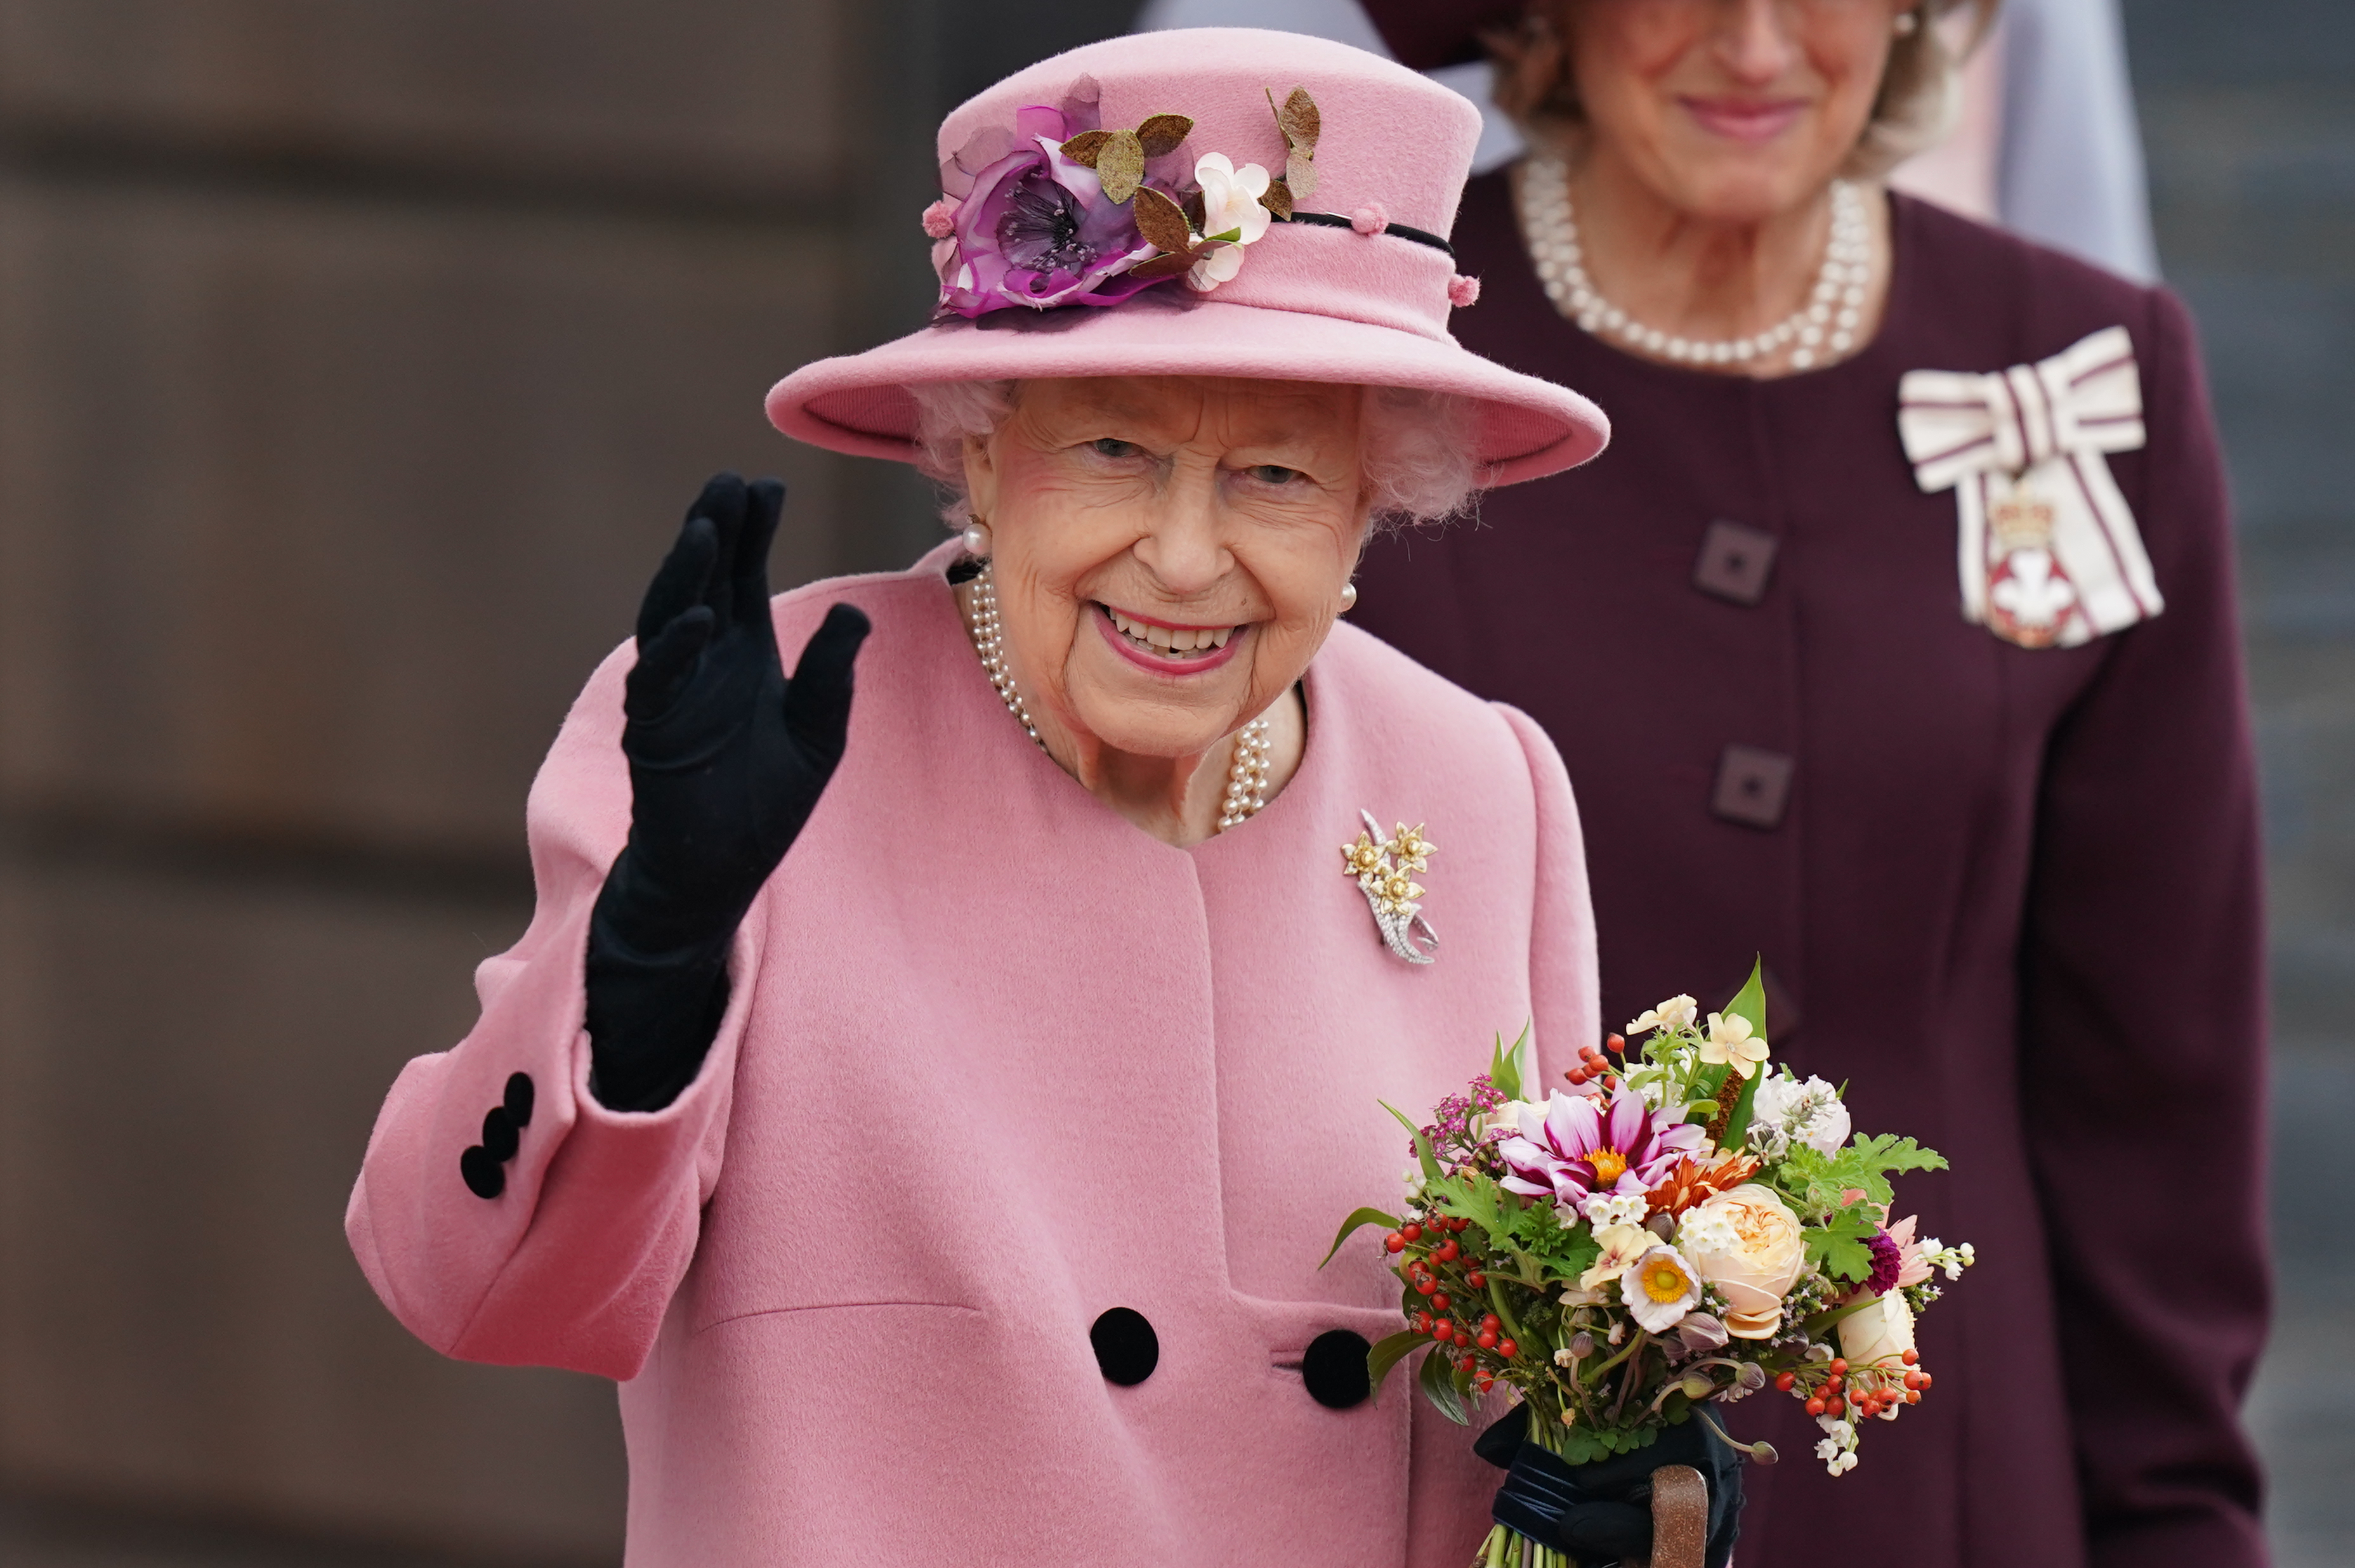 The Queen dressed in pink coat with co-ordinating hat and flowers - photo by Jacob King/PA Wire/PA Images.